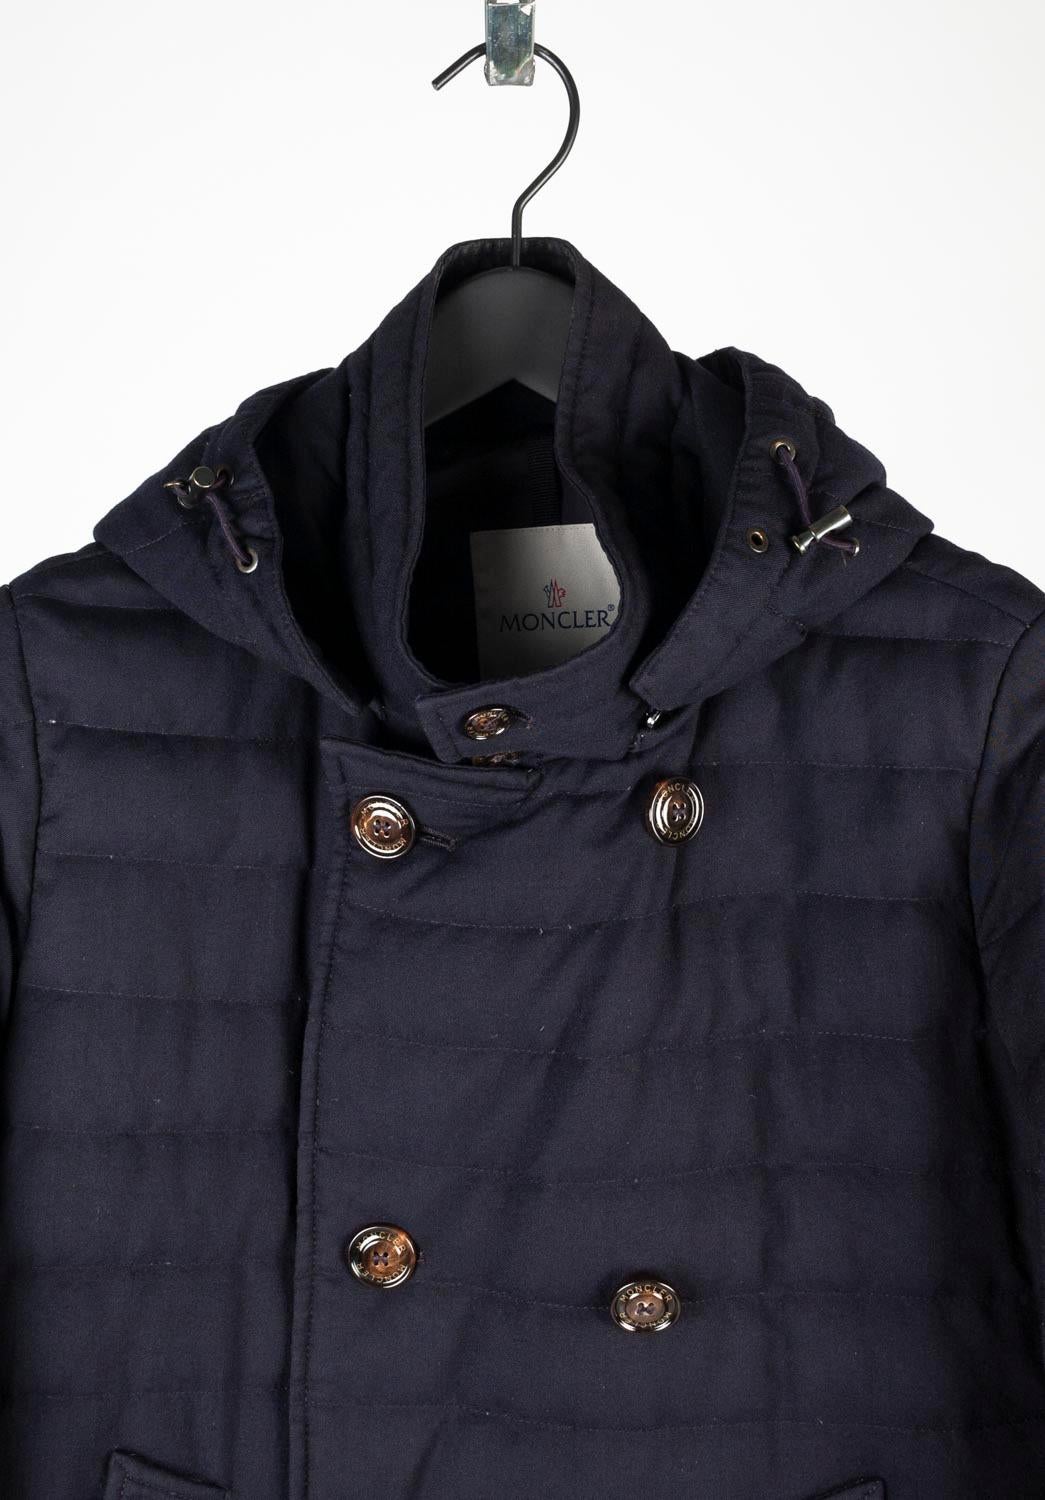 100% genuine Moncler Roux blue down jacket for men, S623 
Color: blue
(An actual color may a bit vary due to individual computer screen interpretation)
Material: 100% wool
Tag size: 2 (Medium)
This jacket is great quality item. Rate 8.5 of 10, very